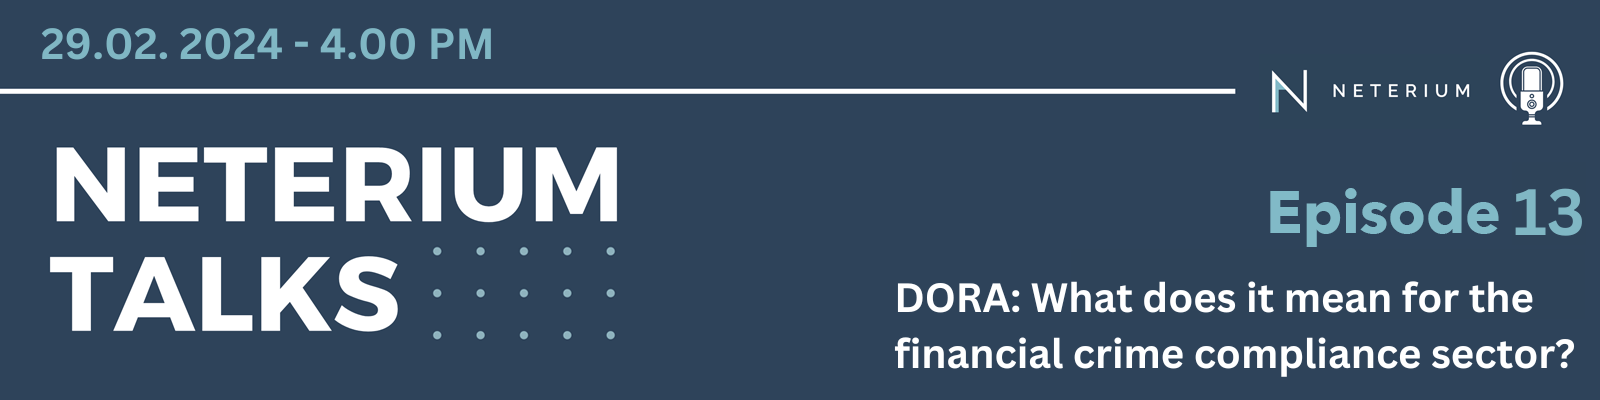 Episode 13: DORA: What does it mean for the financial crime compliance sector?